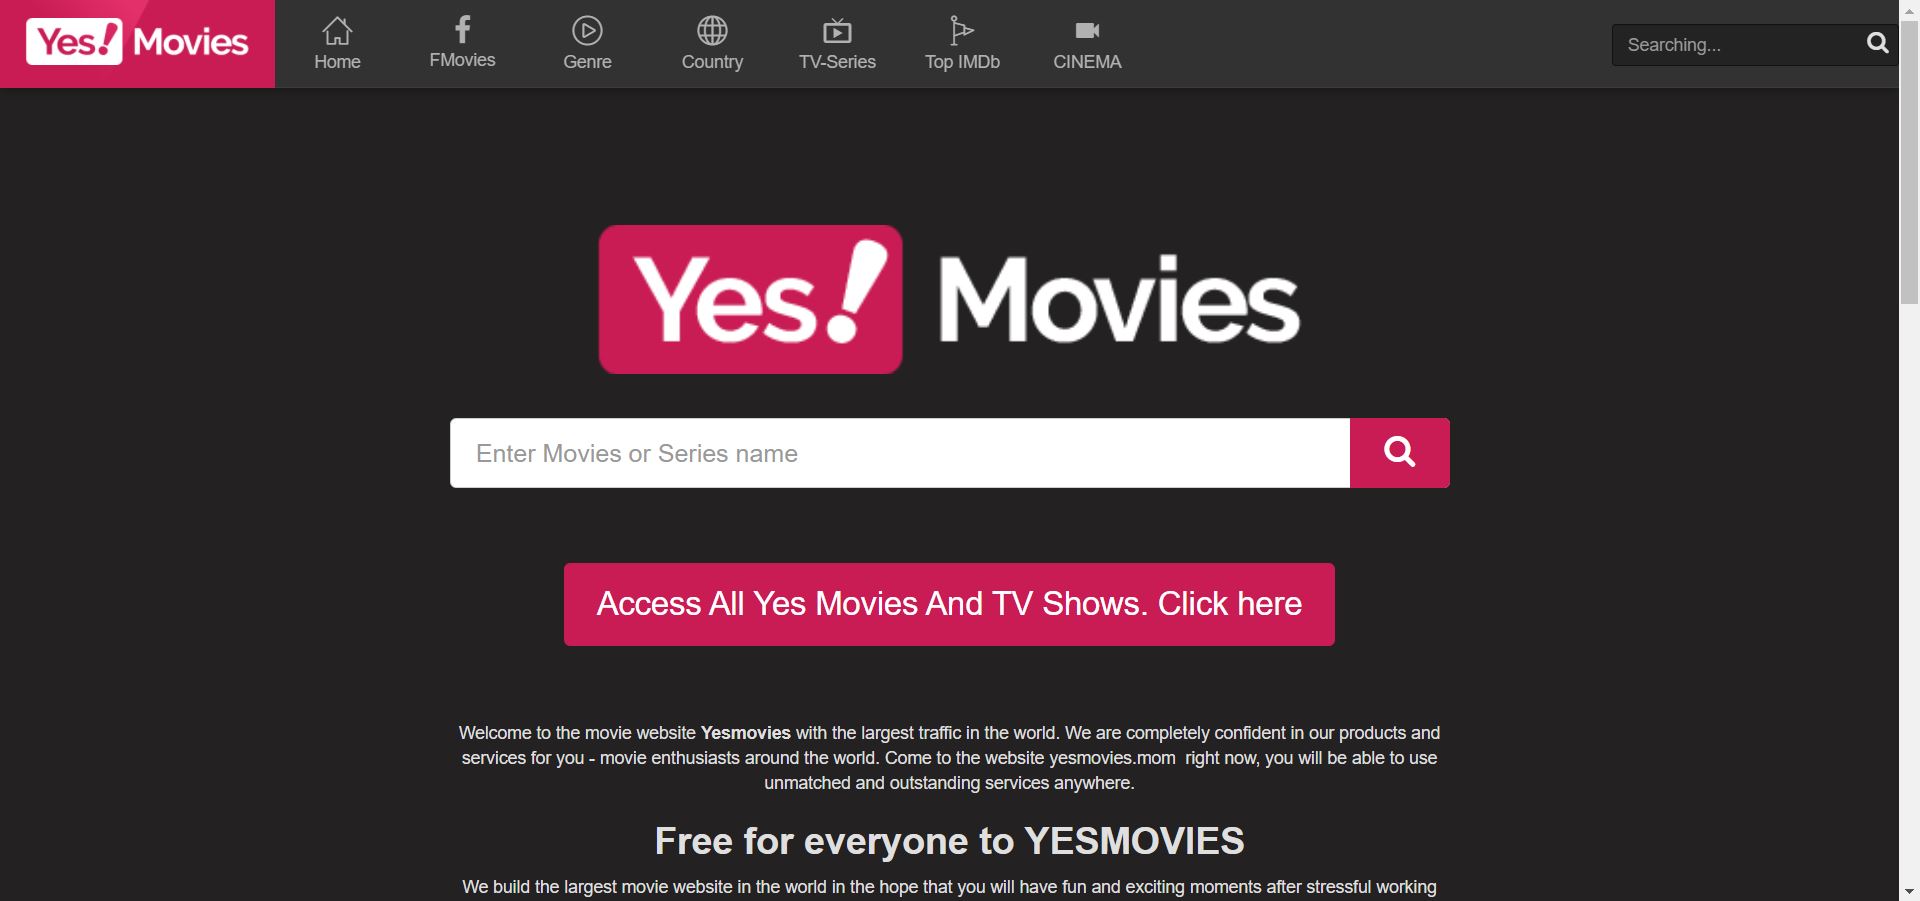 Black colored main page of yesmovies with a search bar and pink colored icon of yesmovies